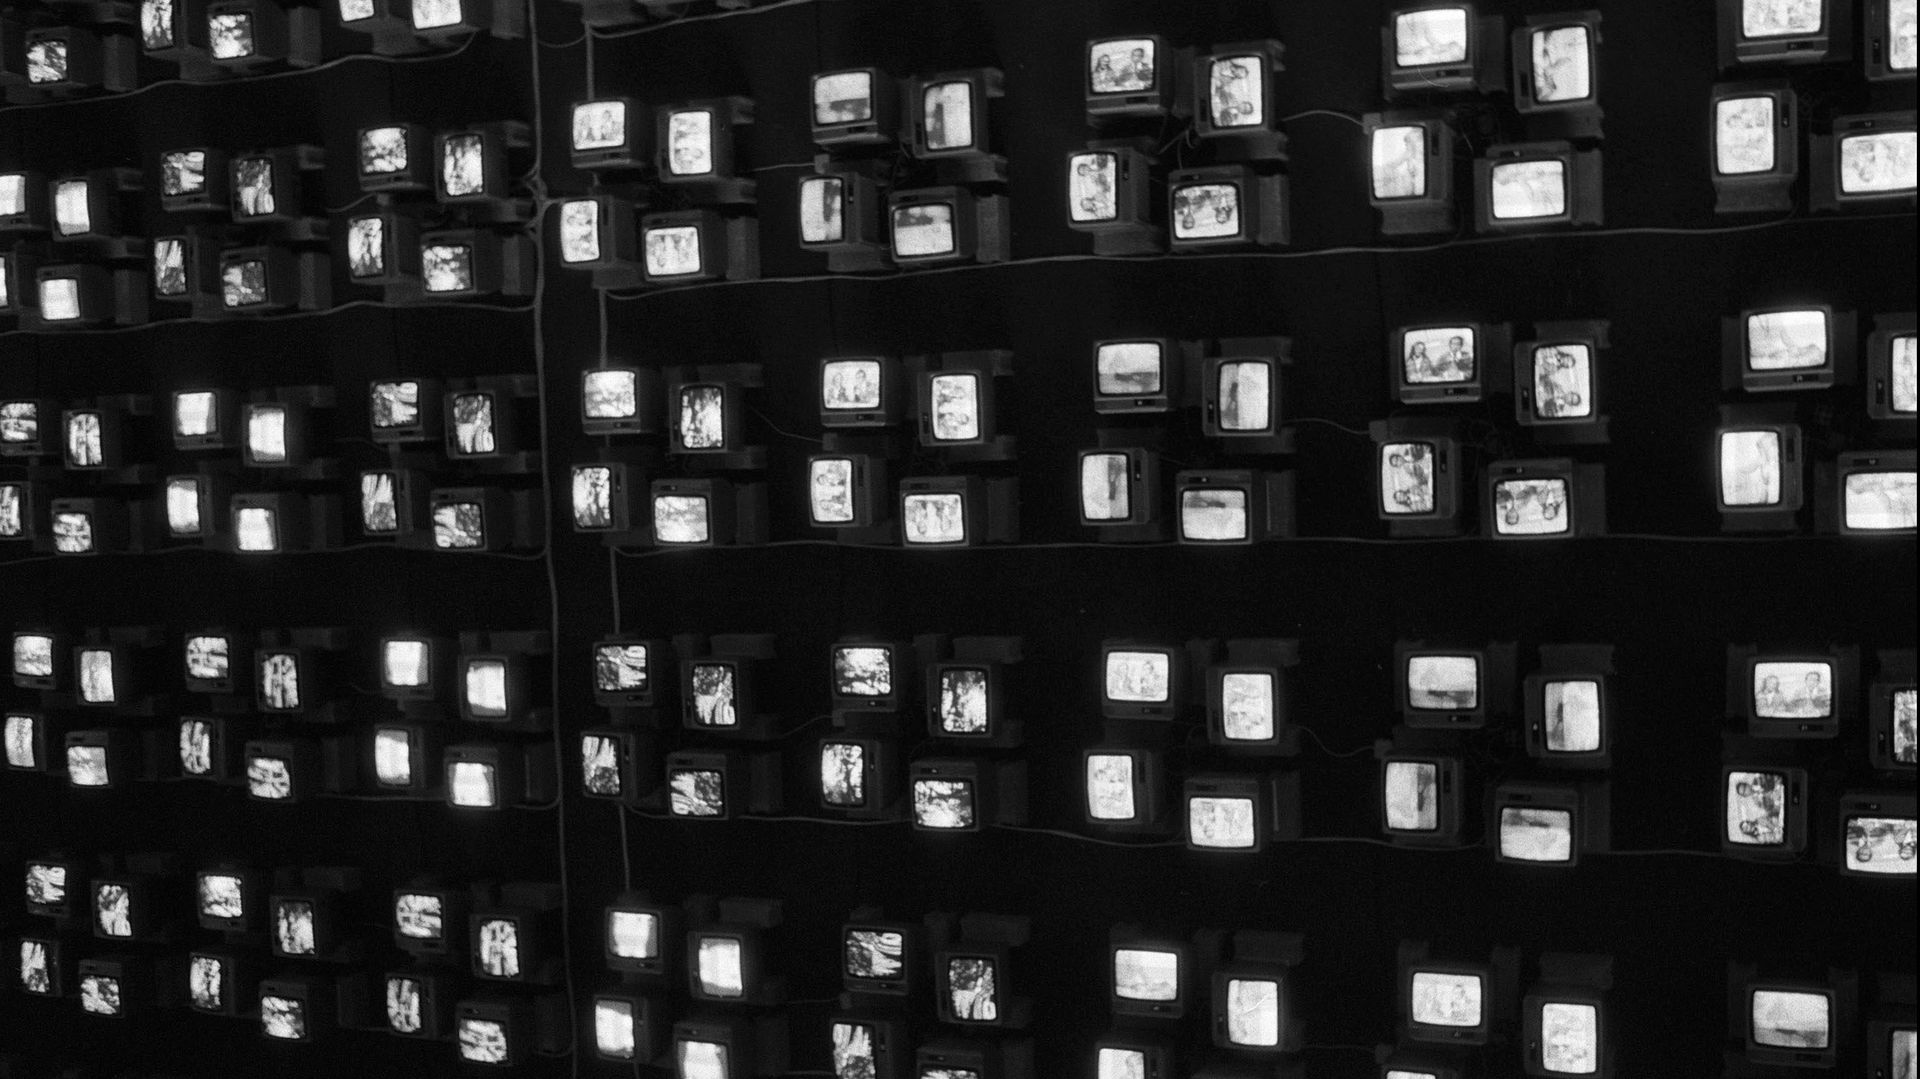 Exhibition of Televiewer of Nam June Paik in Paris,France on December 10th,1982.